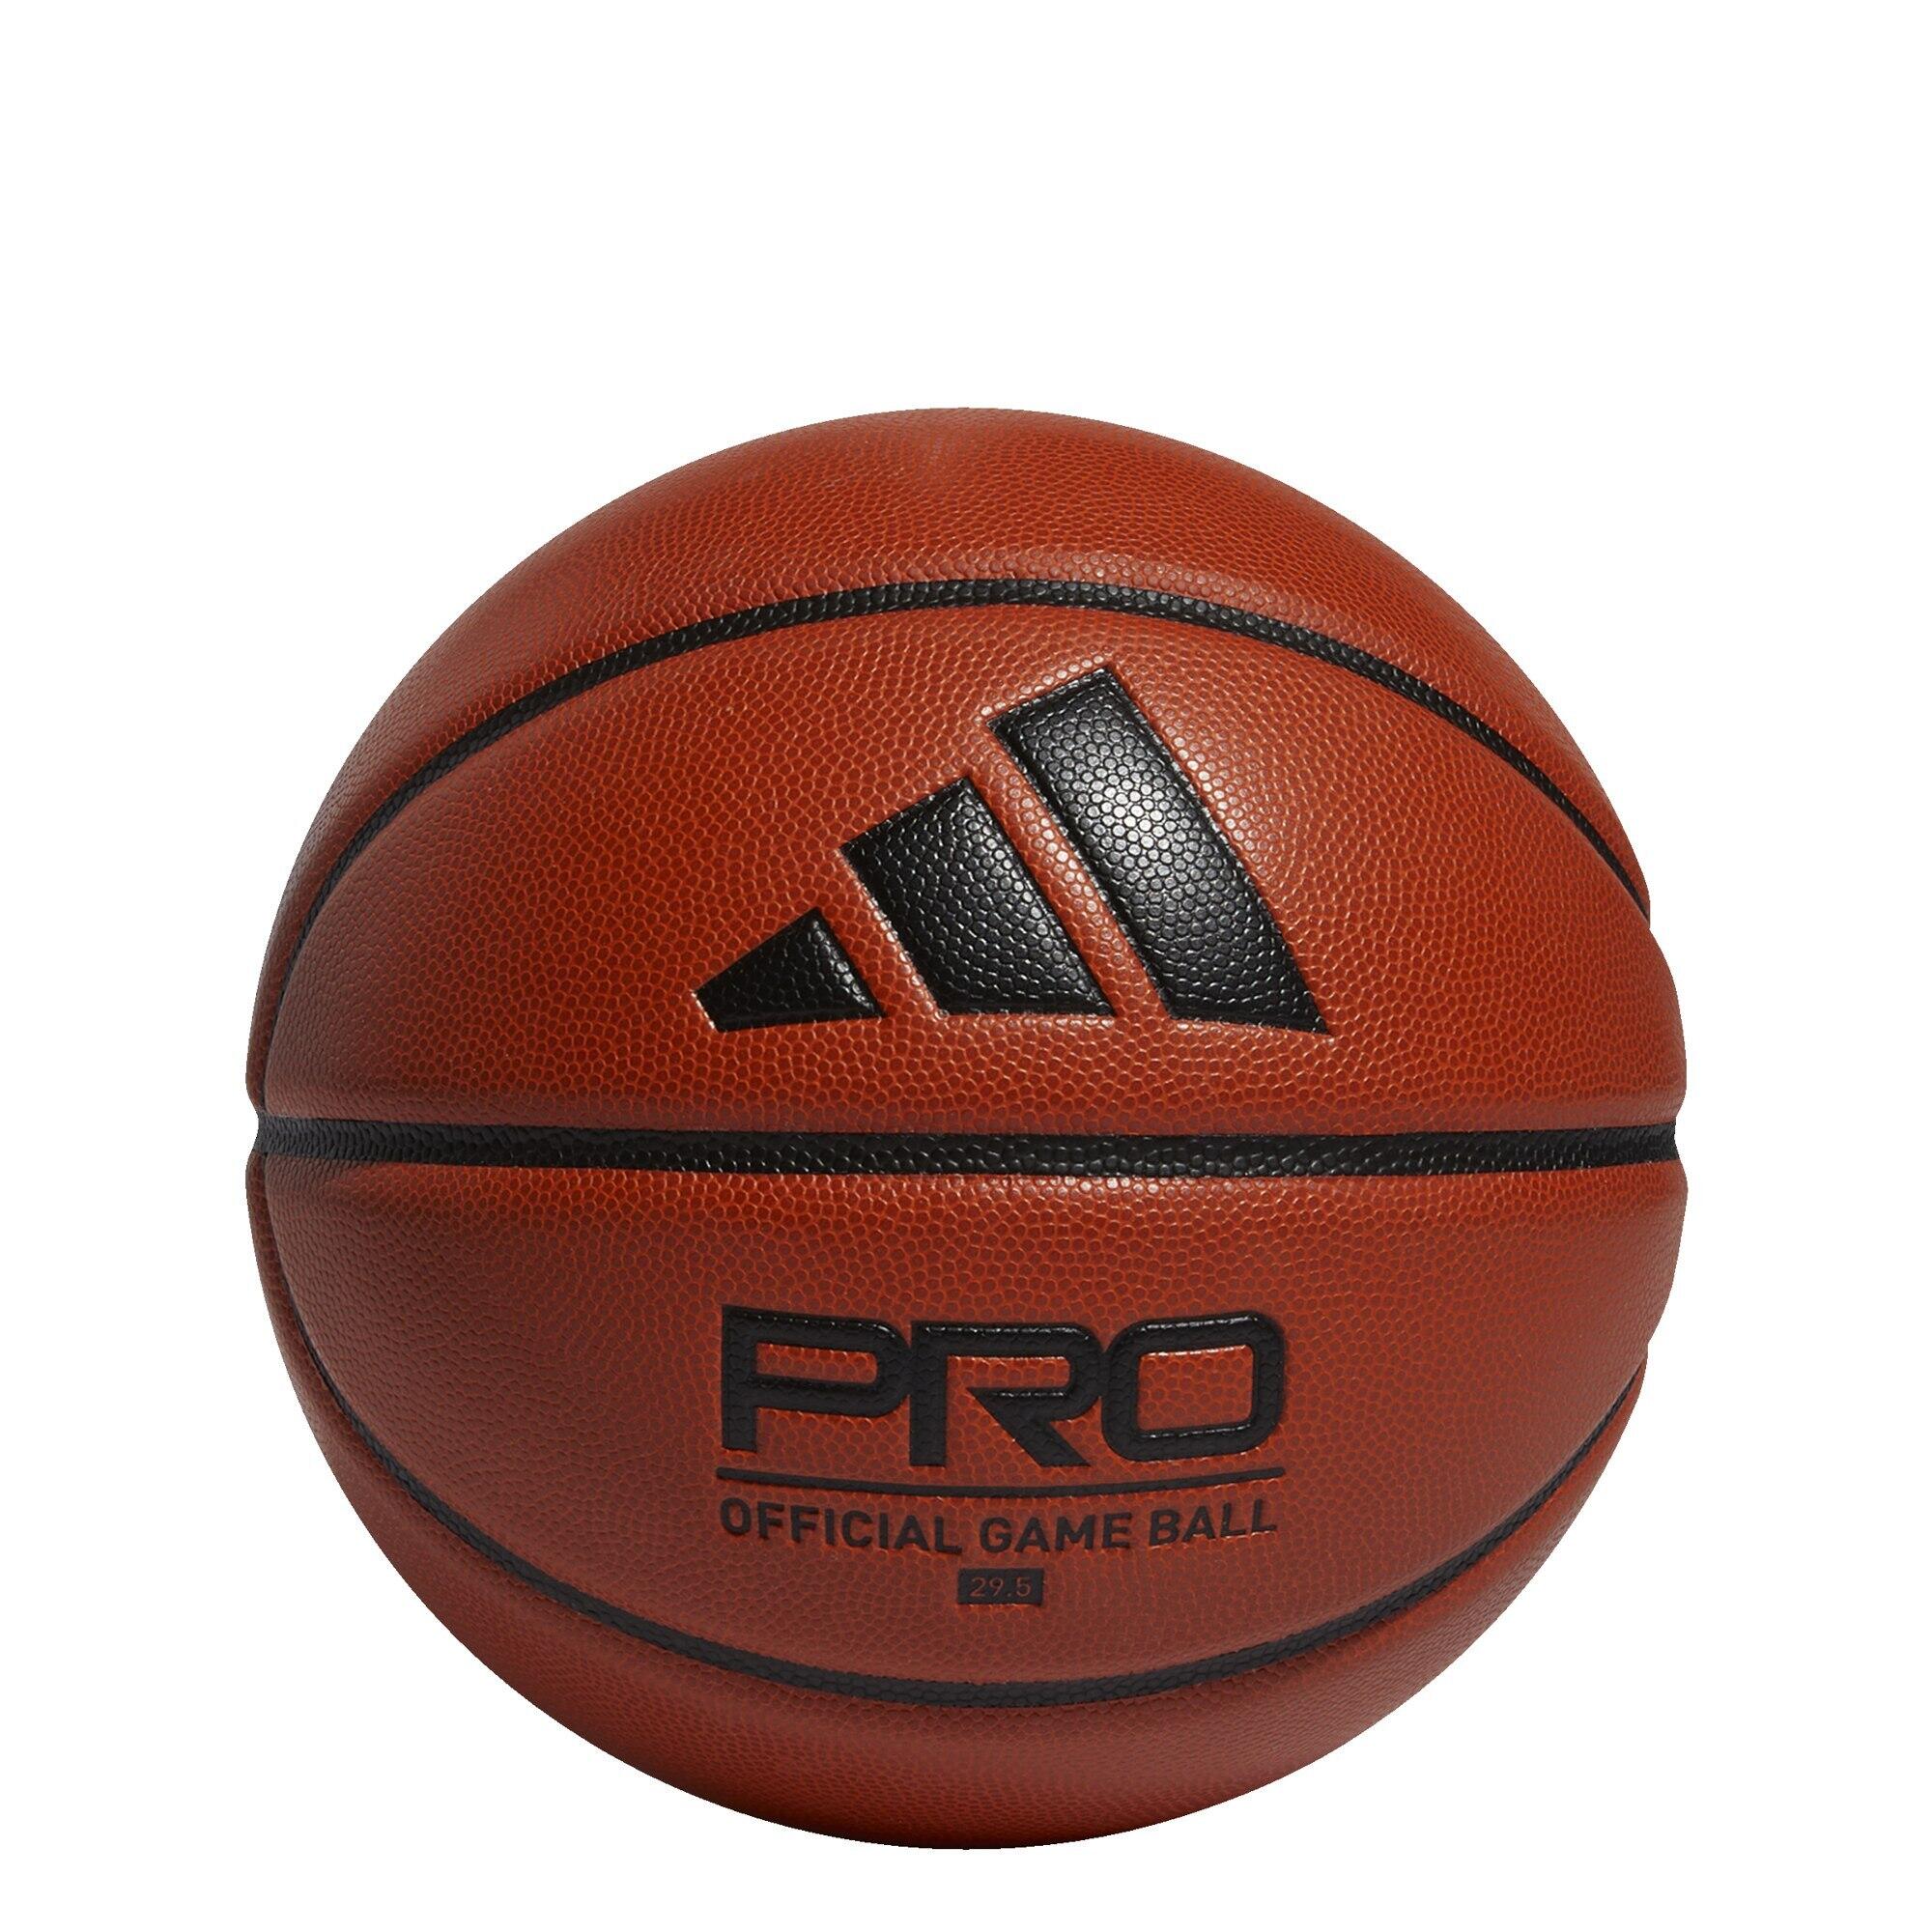 Pro 3.0 Official Game Ball 1/6